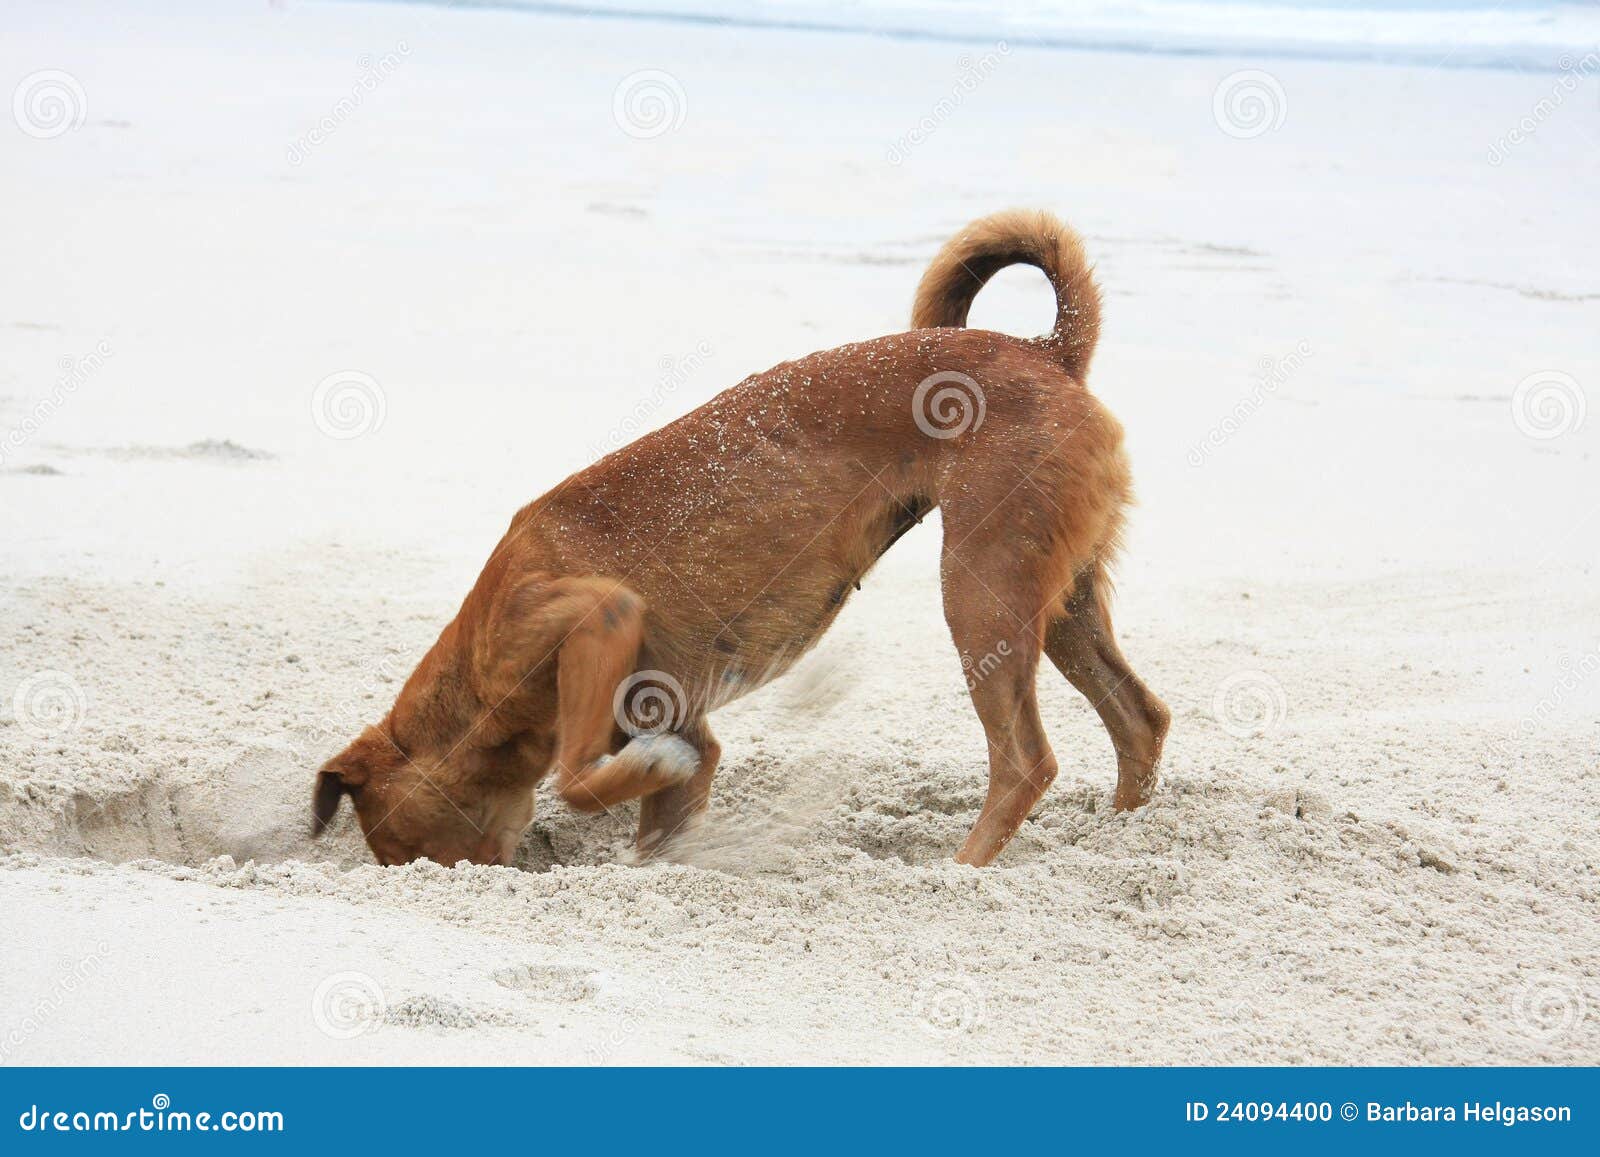 free clipart dog digging - photo #36